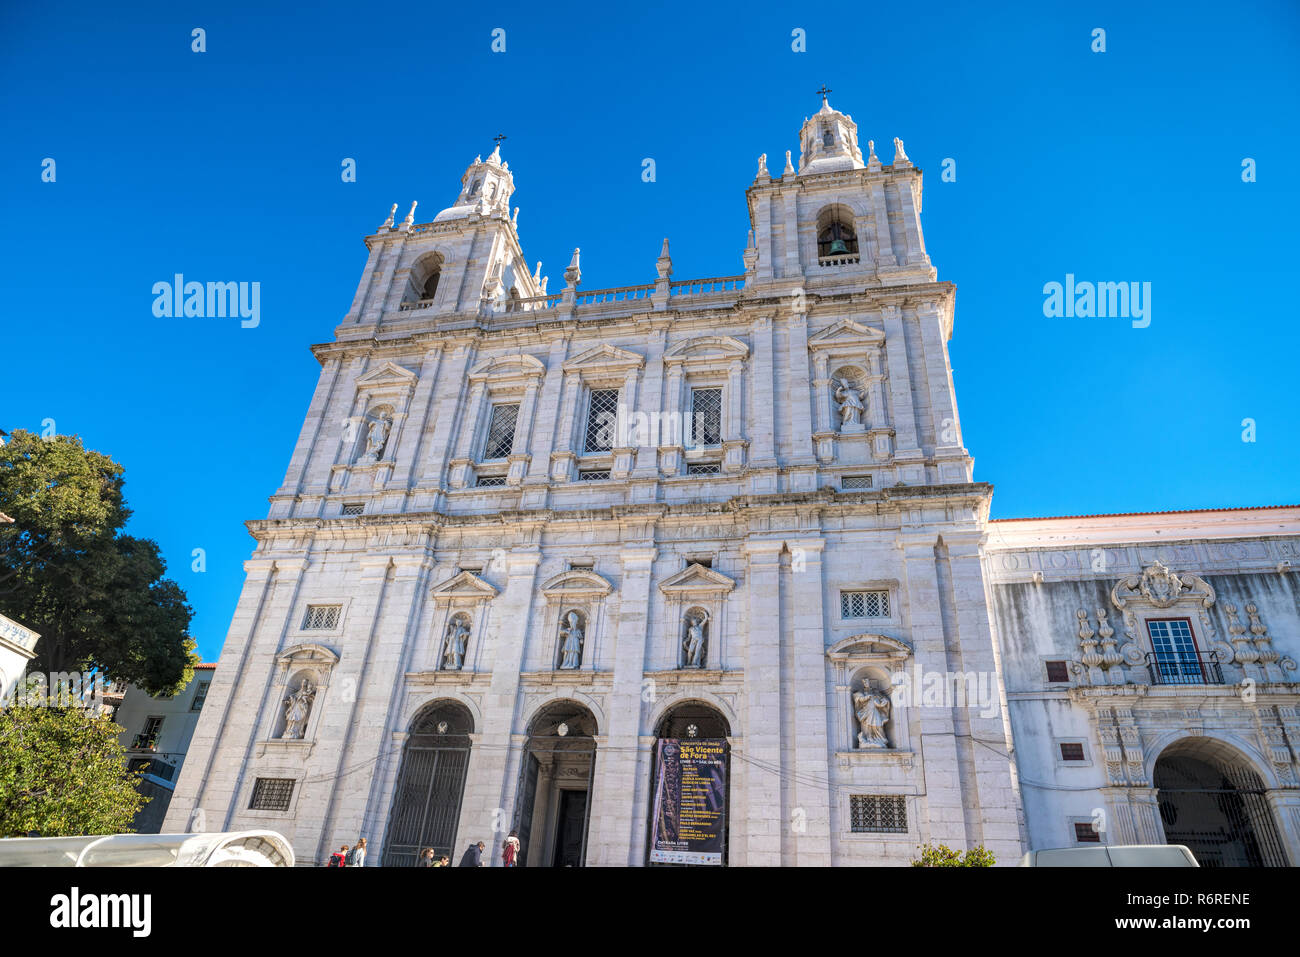 Main facade of Monastery of Sao Vicente de Fora in Alfama, Lisbon, one of the most important monasteries in the country. Stock Photo